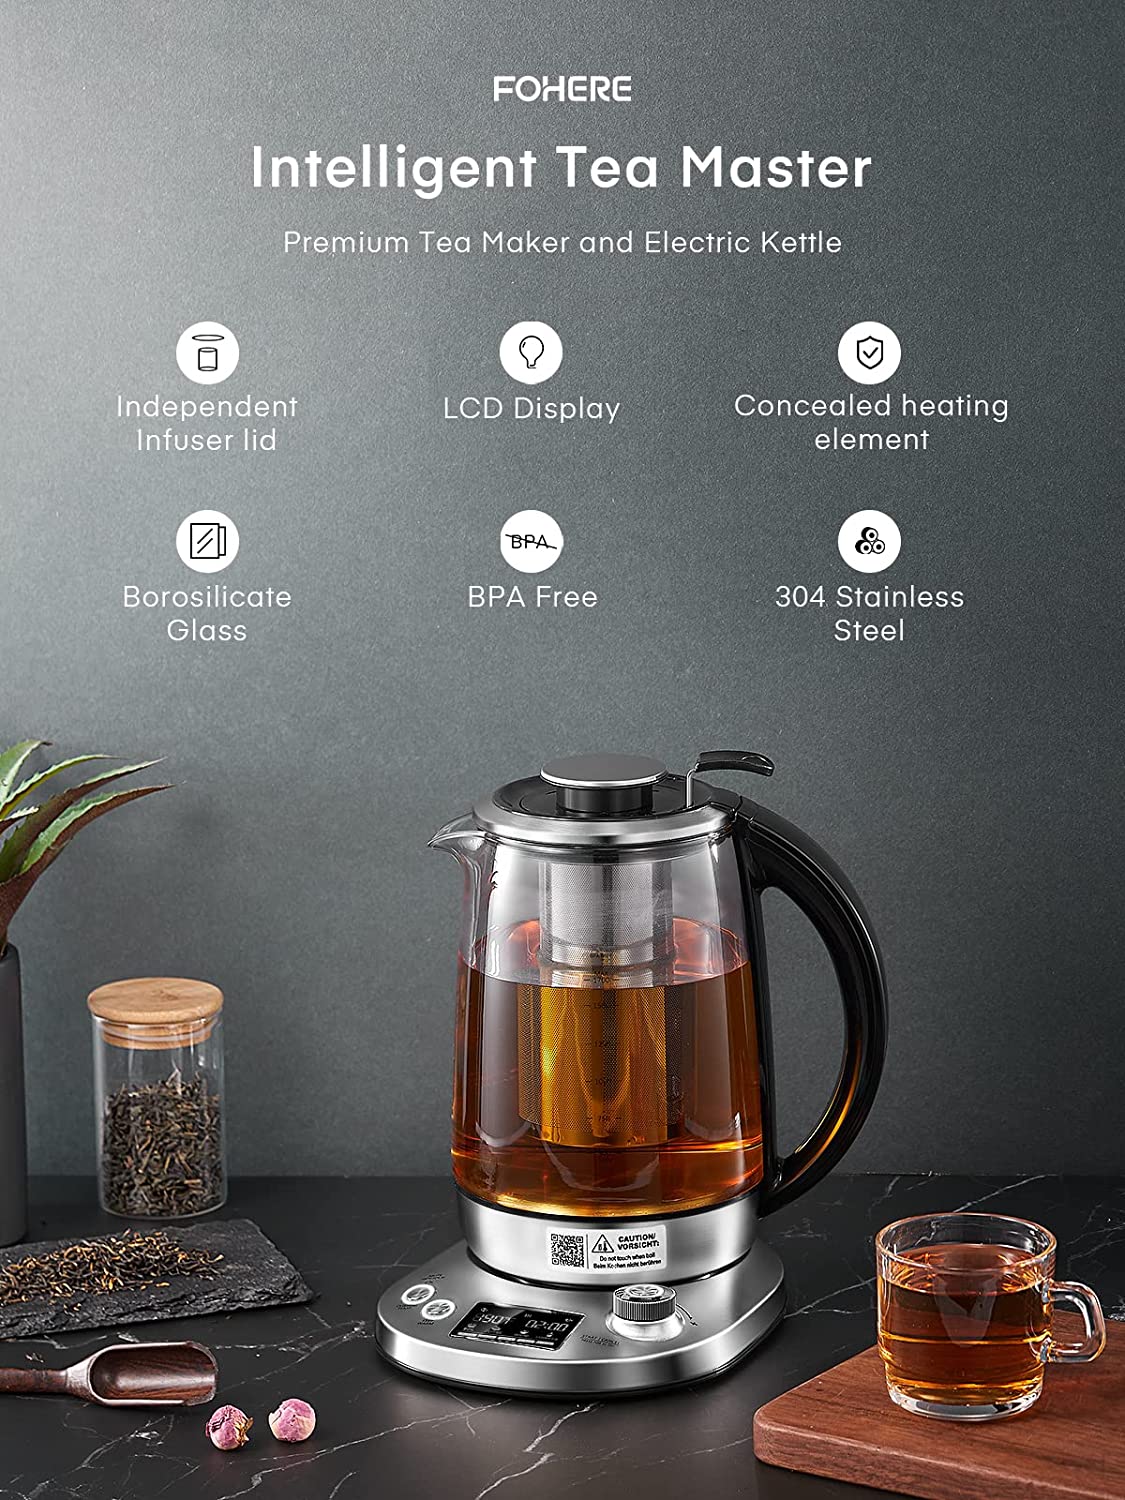 intelligent tea master, Electric Kettle, FOHERE Electric Tea Kettle with 9 Presets, 1.7 Liter Tea Maker with Removable Infuser, 140℉ to 212℉ Precise Temperature Control, 1200W, Borosilicate Glass | Stainless Steel